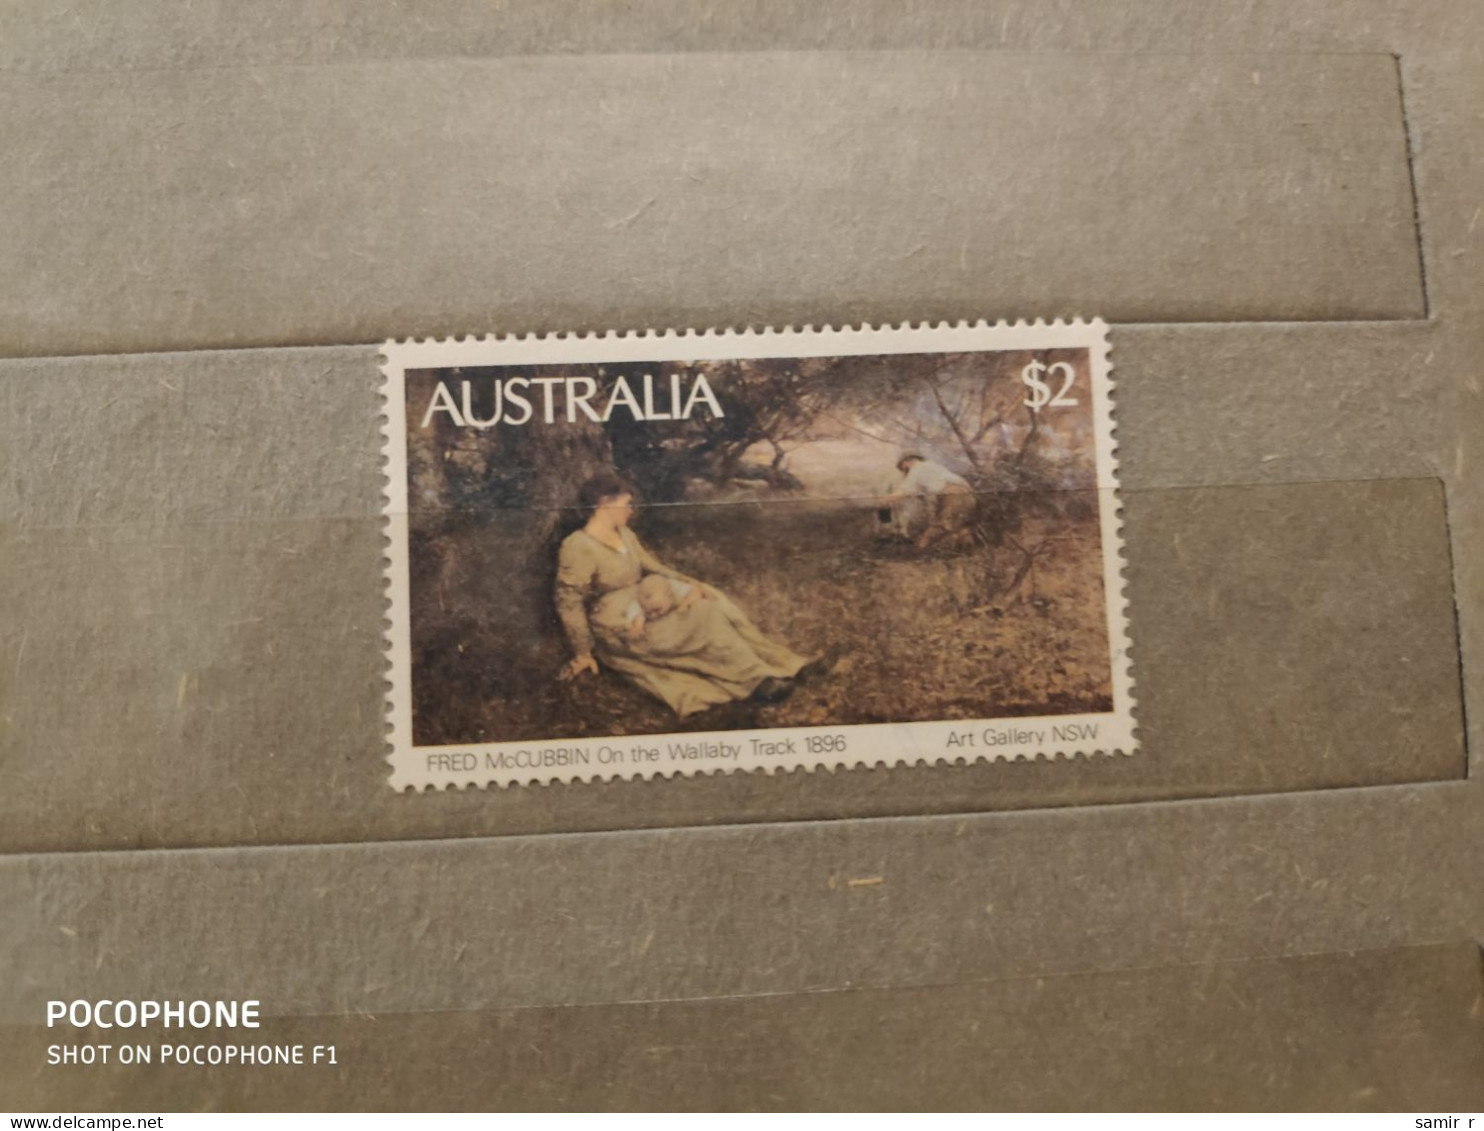 Australia	Painting (F95) - Mint Stamps